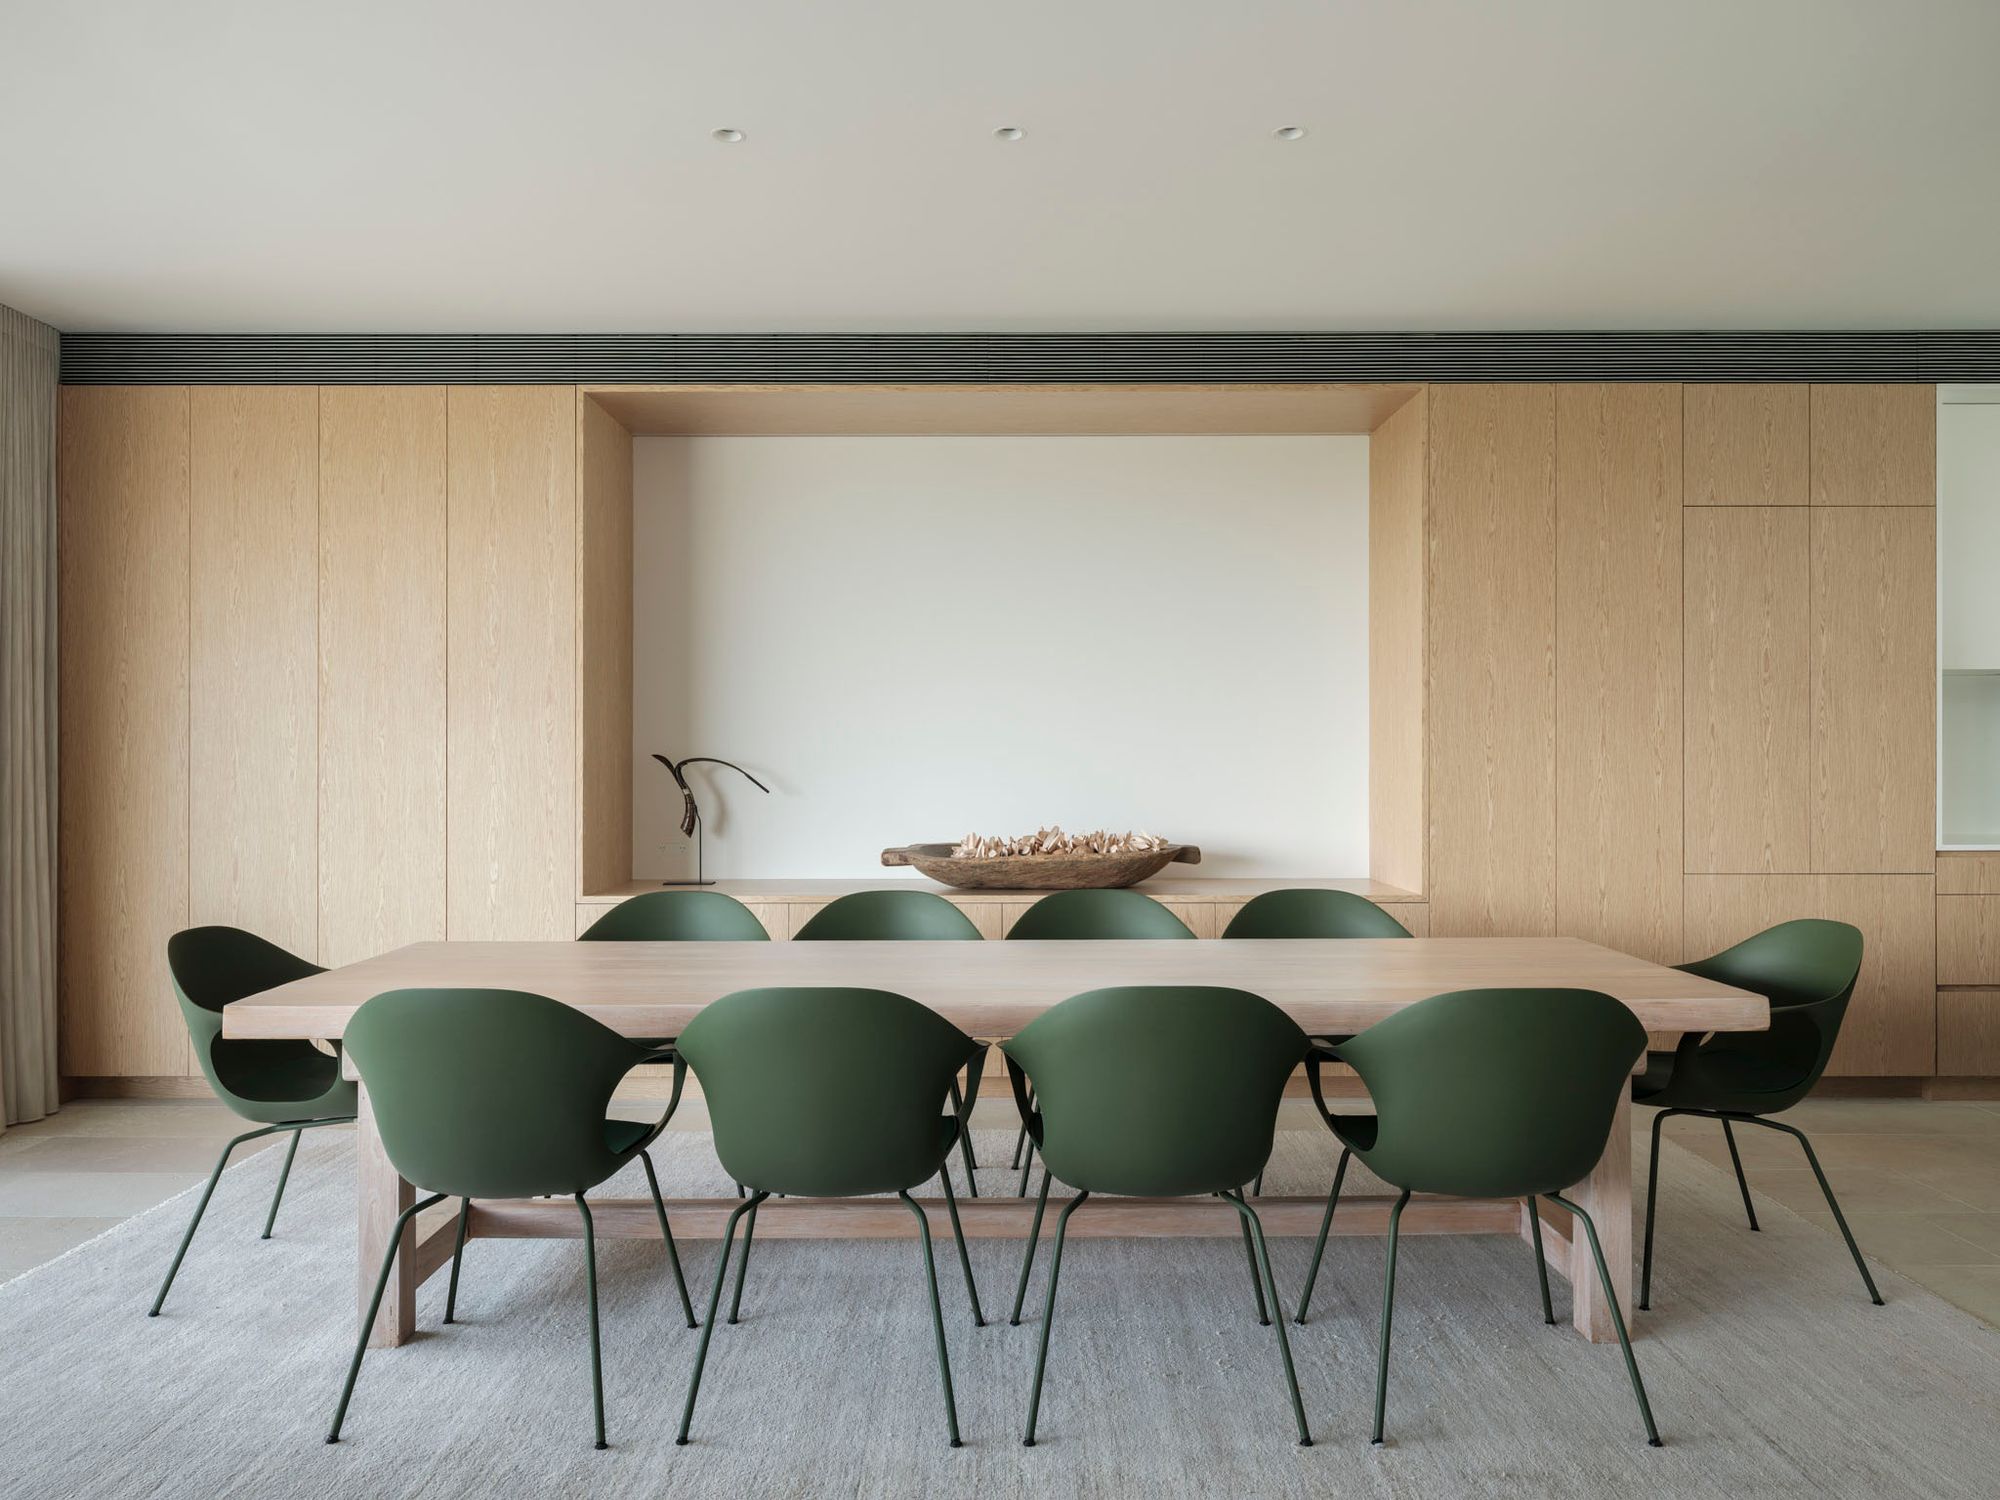 Northbridge by Corben Architects showing interior of dining room with green dining chairs